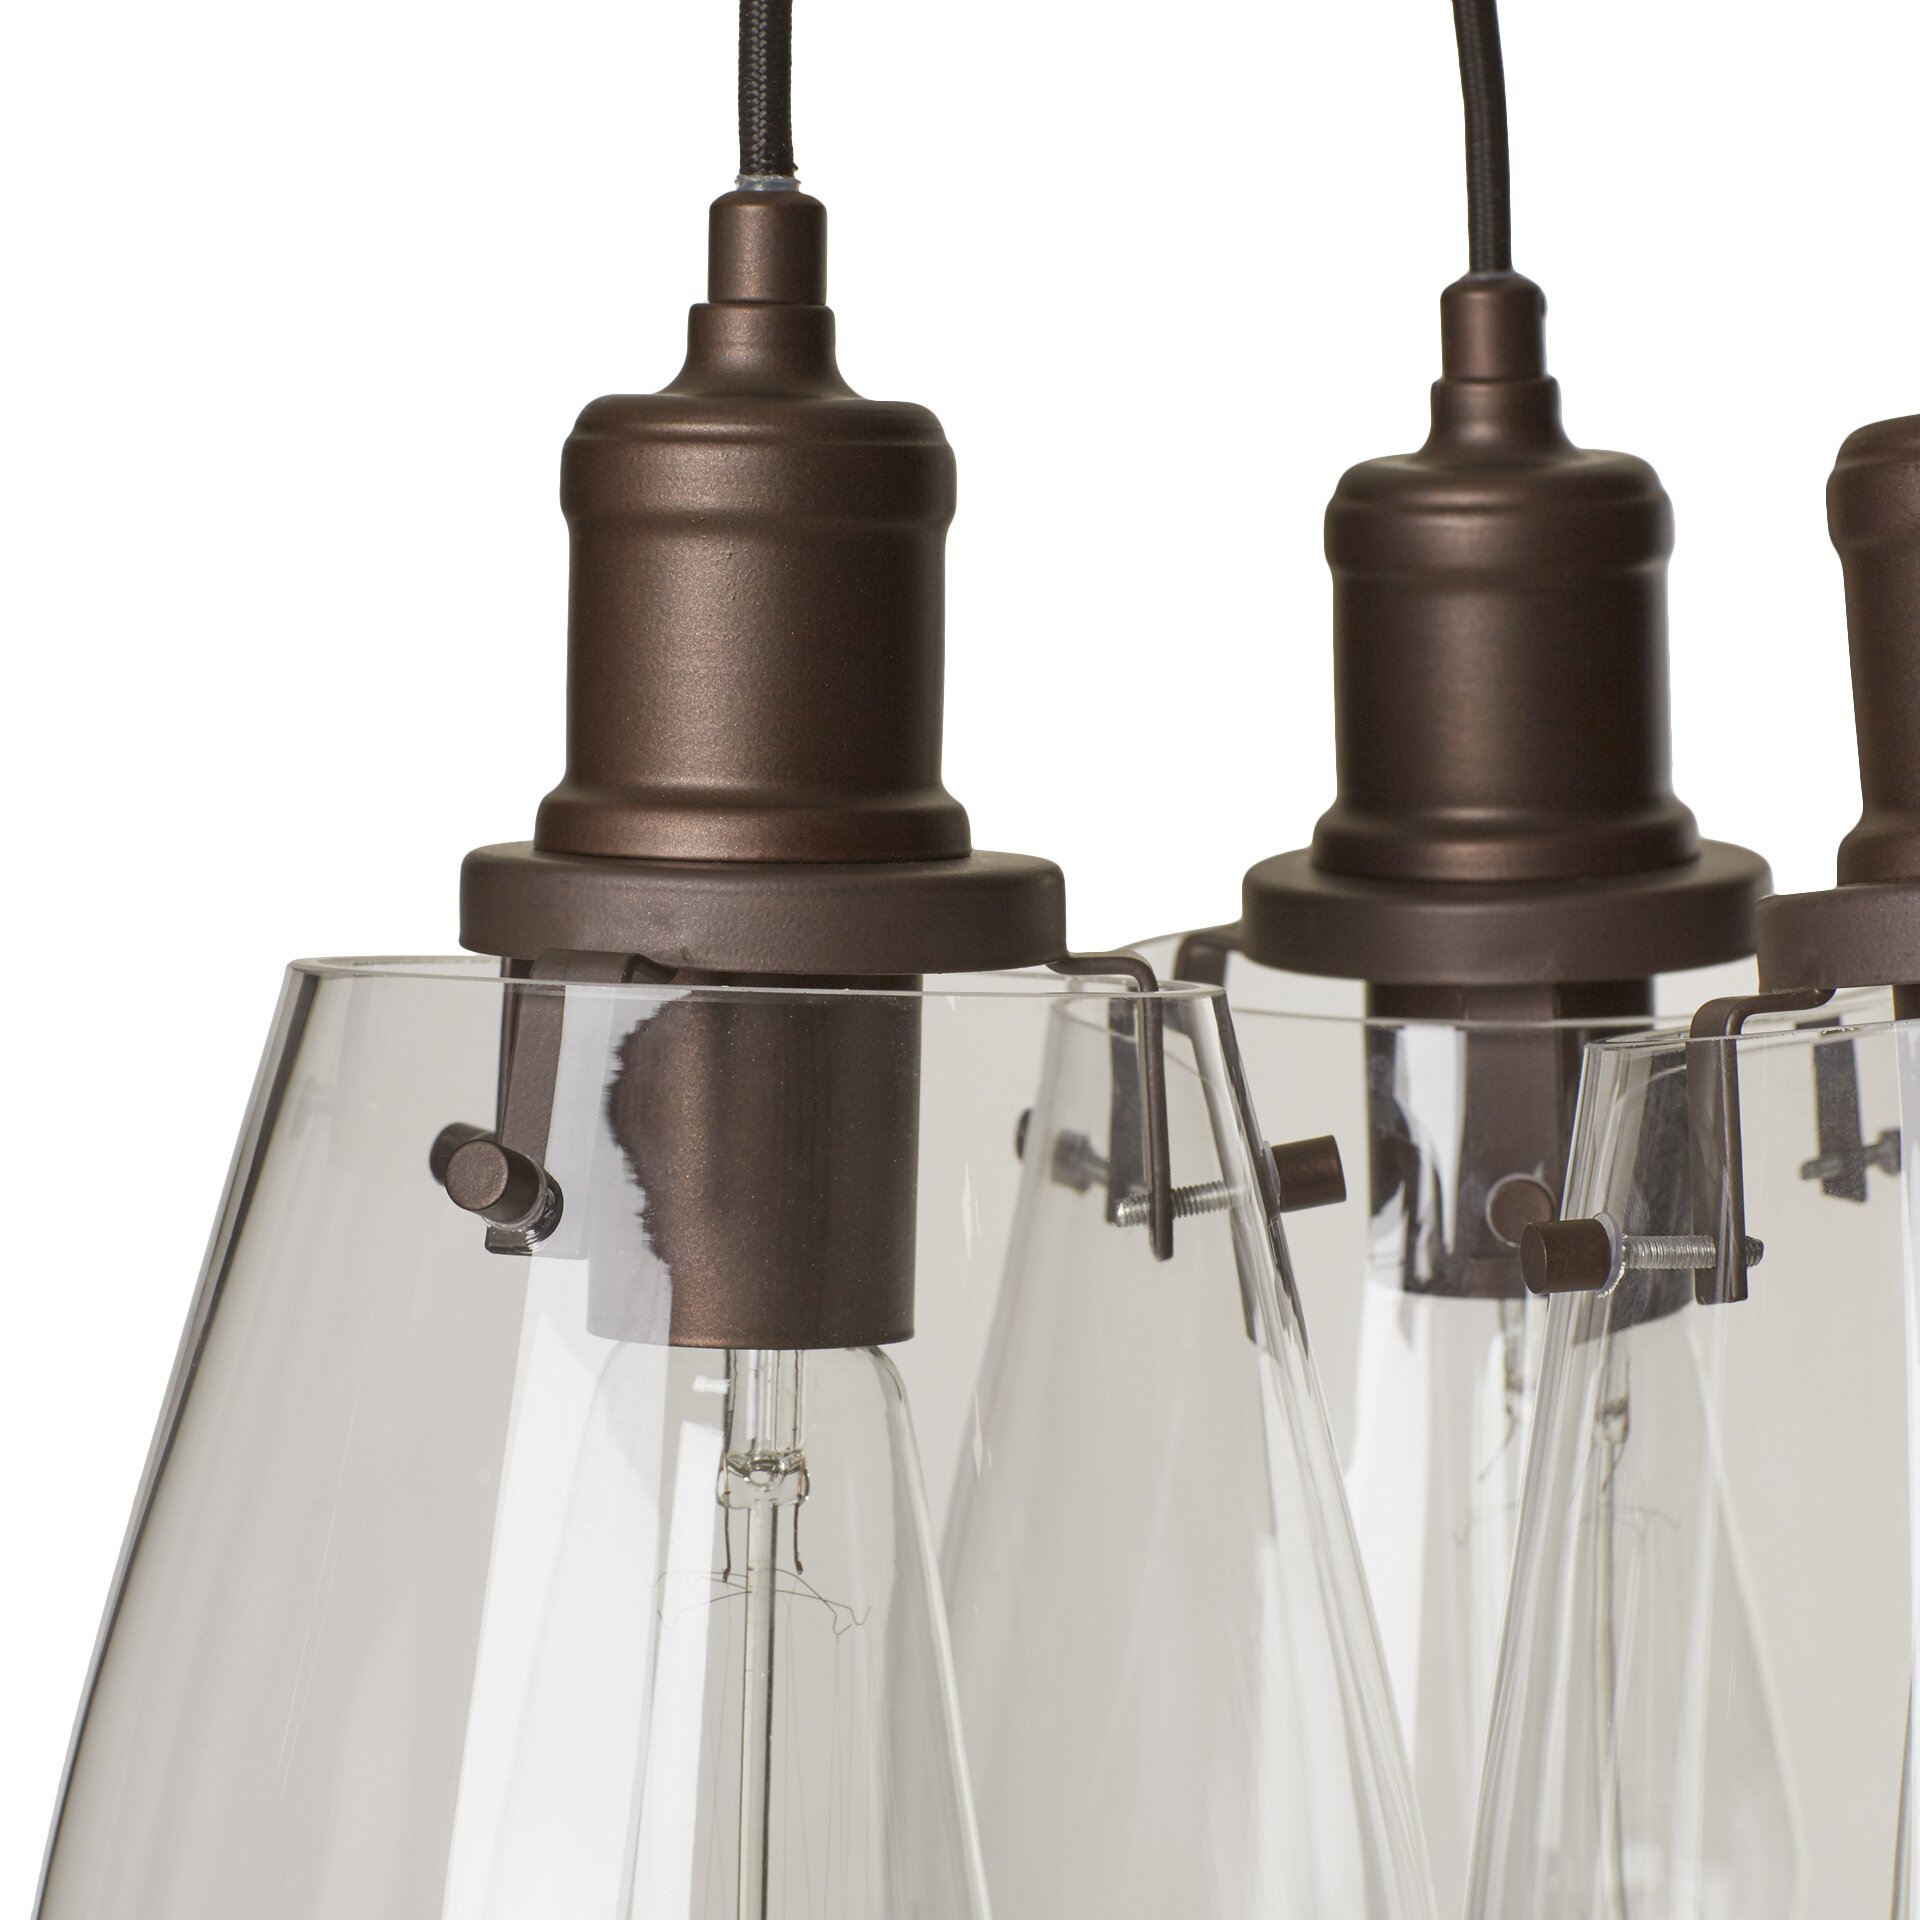 Mercury Row Lighting: Brightening Your Home With Style